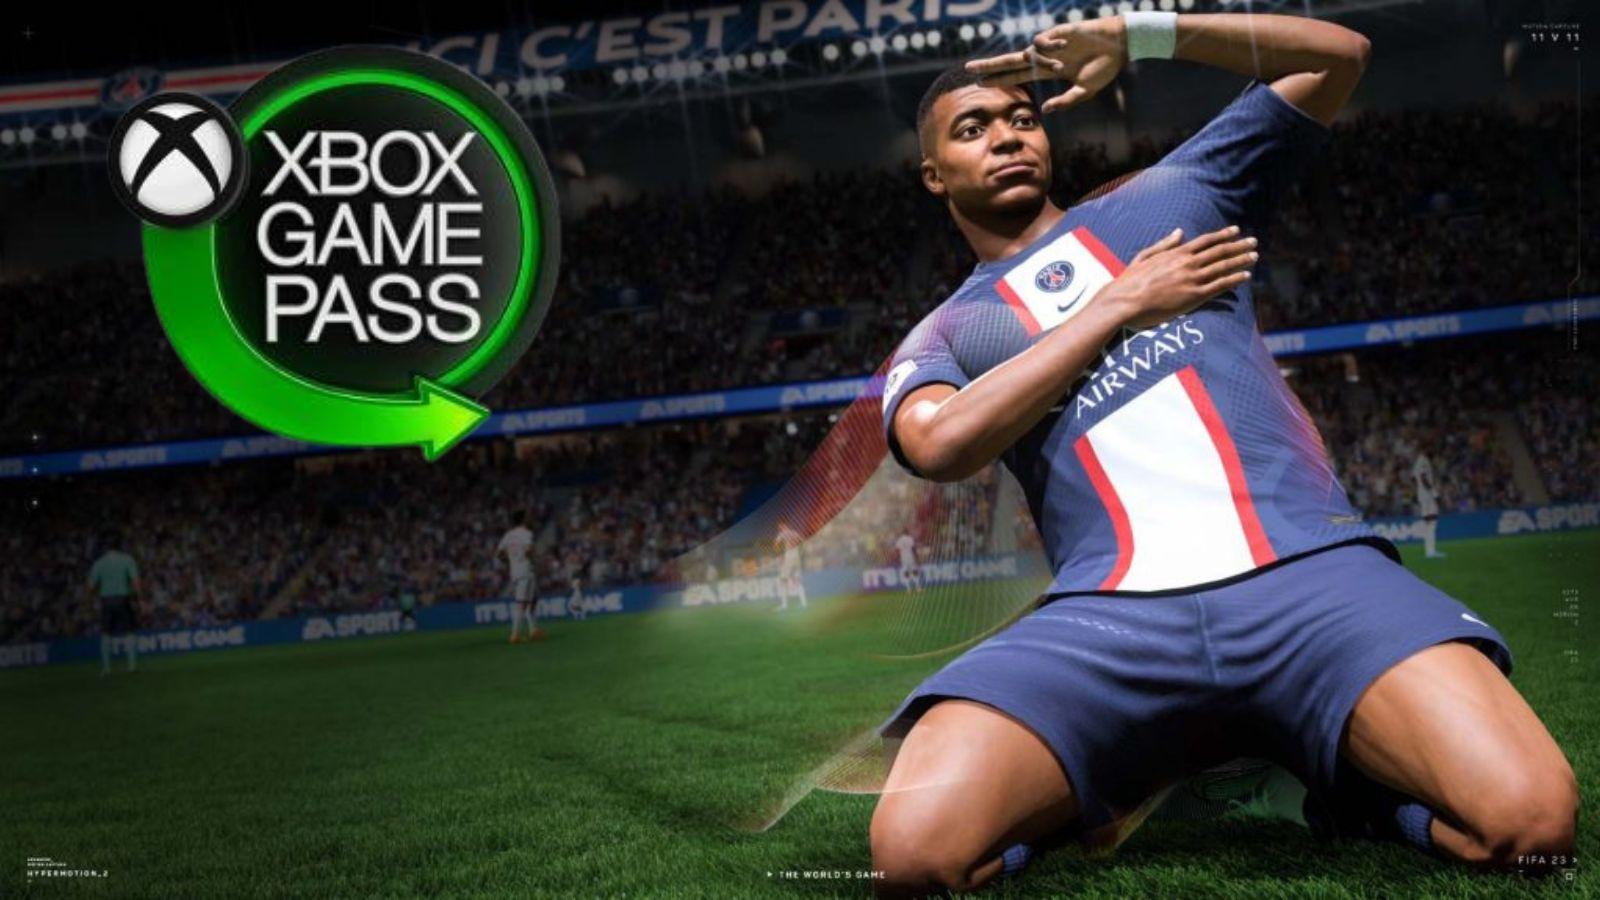 When will FIFA 23 come to Xbox Game Pass?